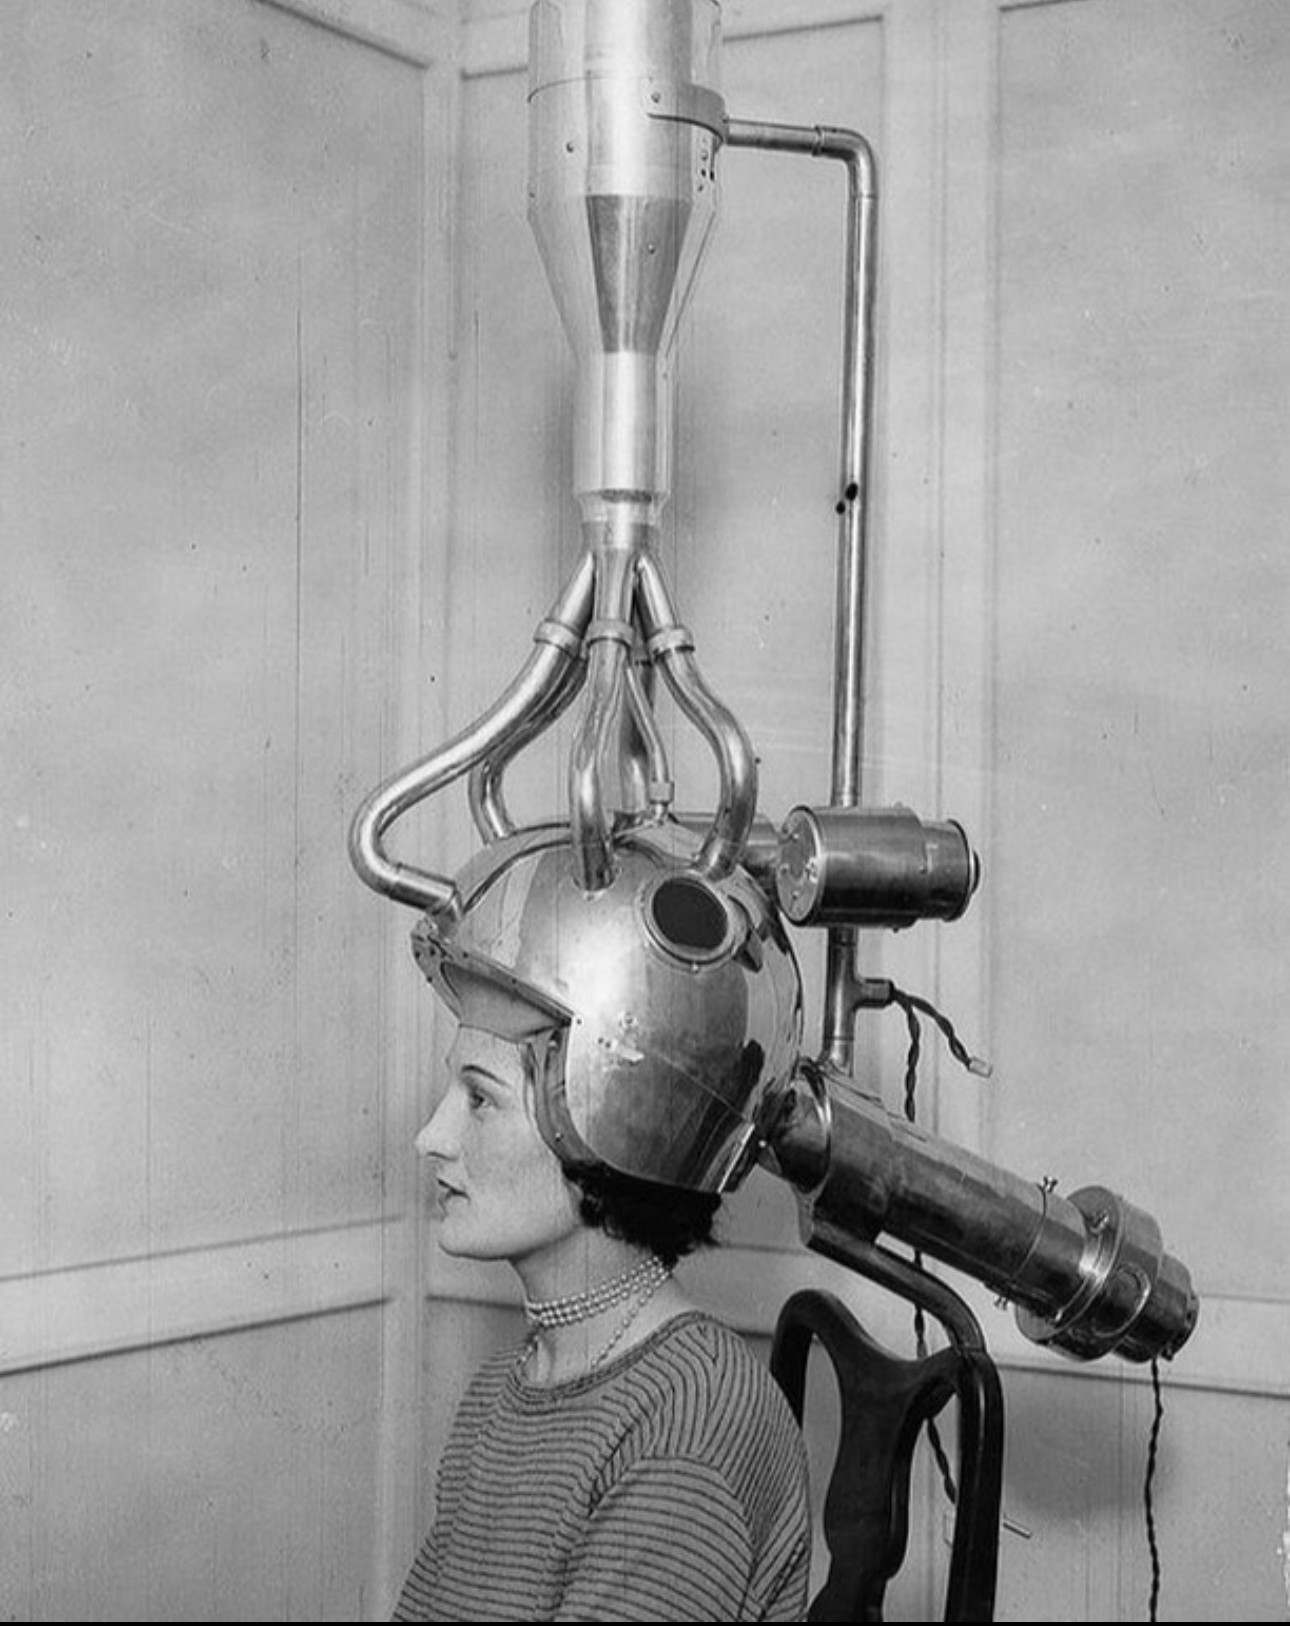 A black and white vintage photo of a woman sitting with an elaborate hair dryer machine (?) fitted over her head. The machine has multiple tubes and a large metal hood.